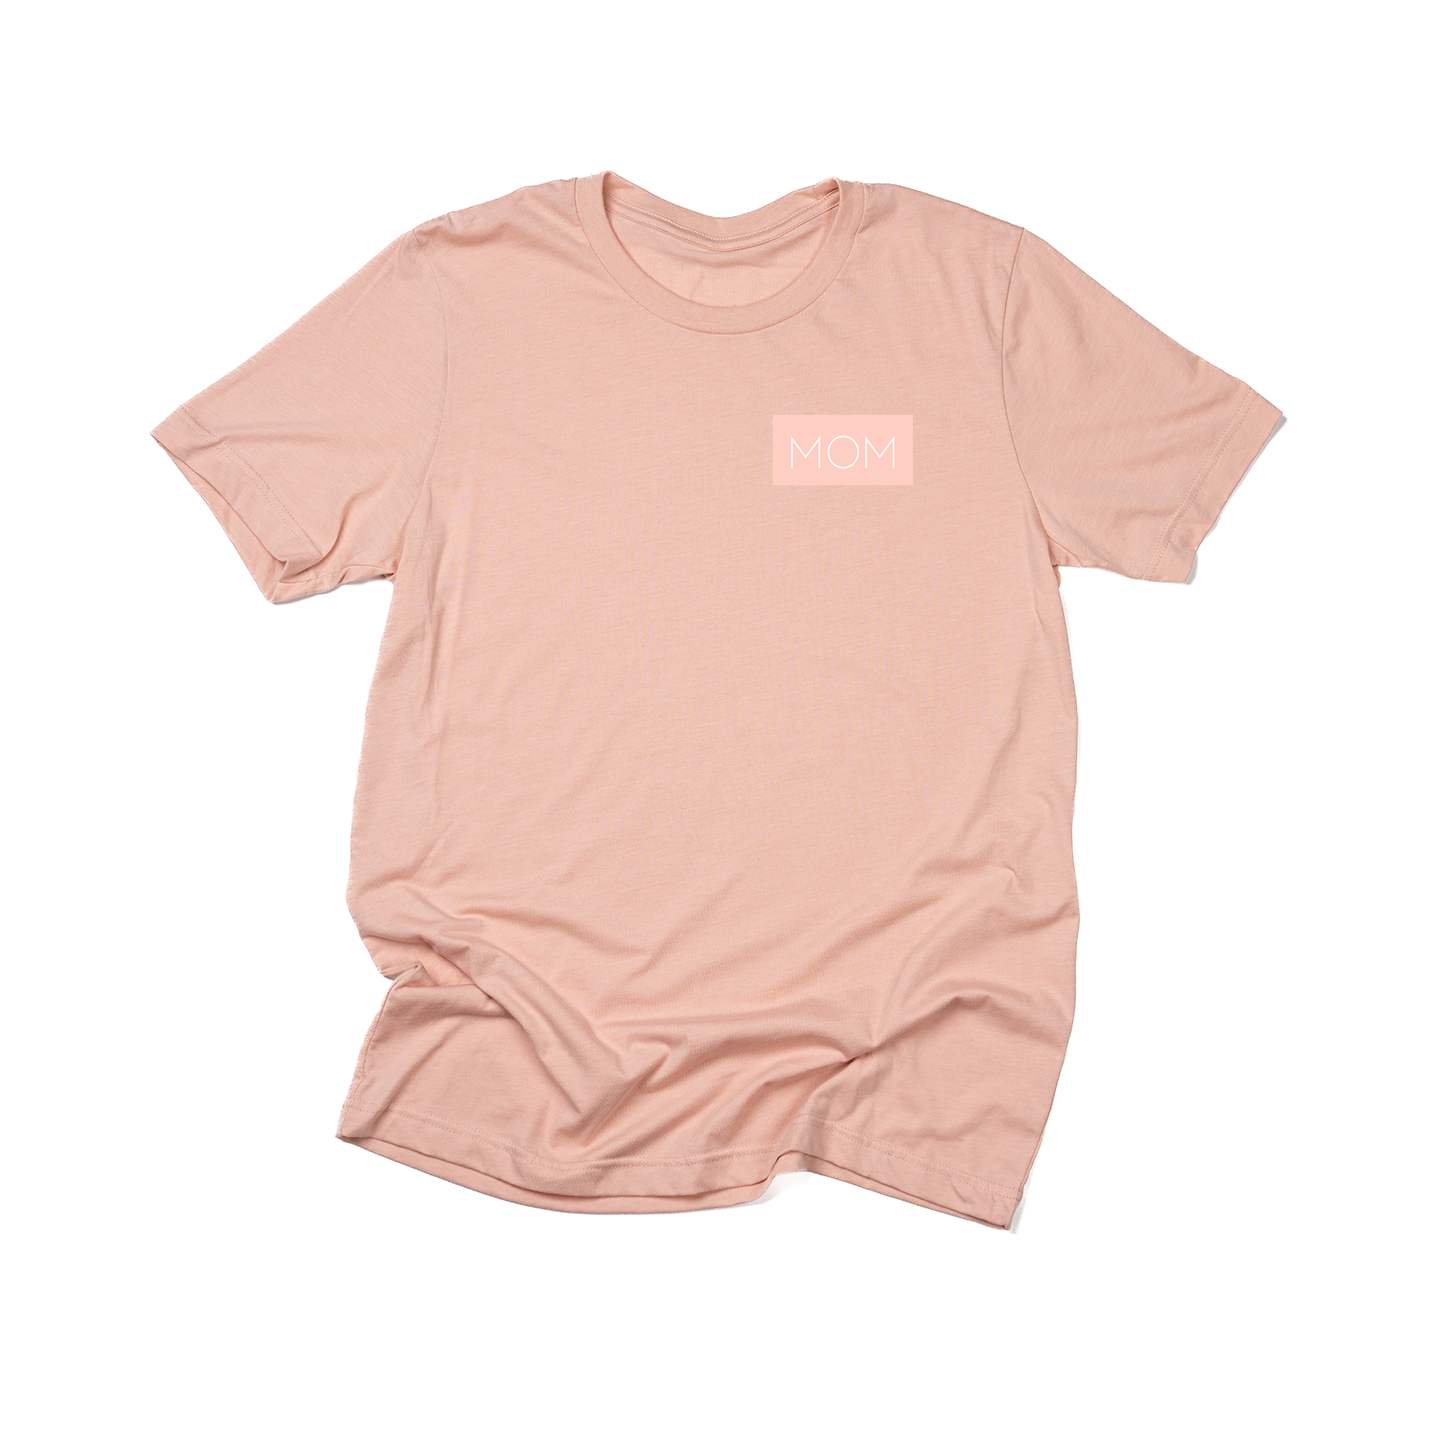 Mom (Boxed Collection, Pocket, Ballerina Pink Box/White Text) - Tee (Peach)